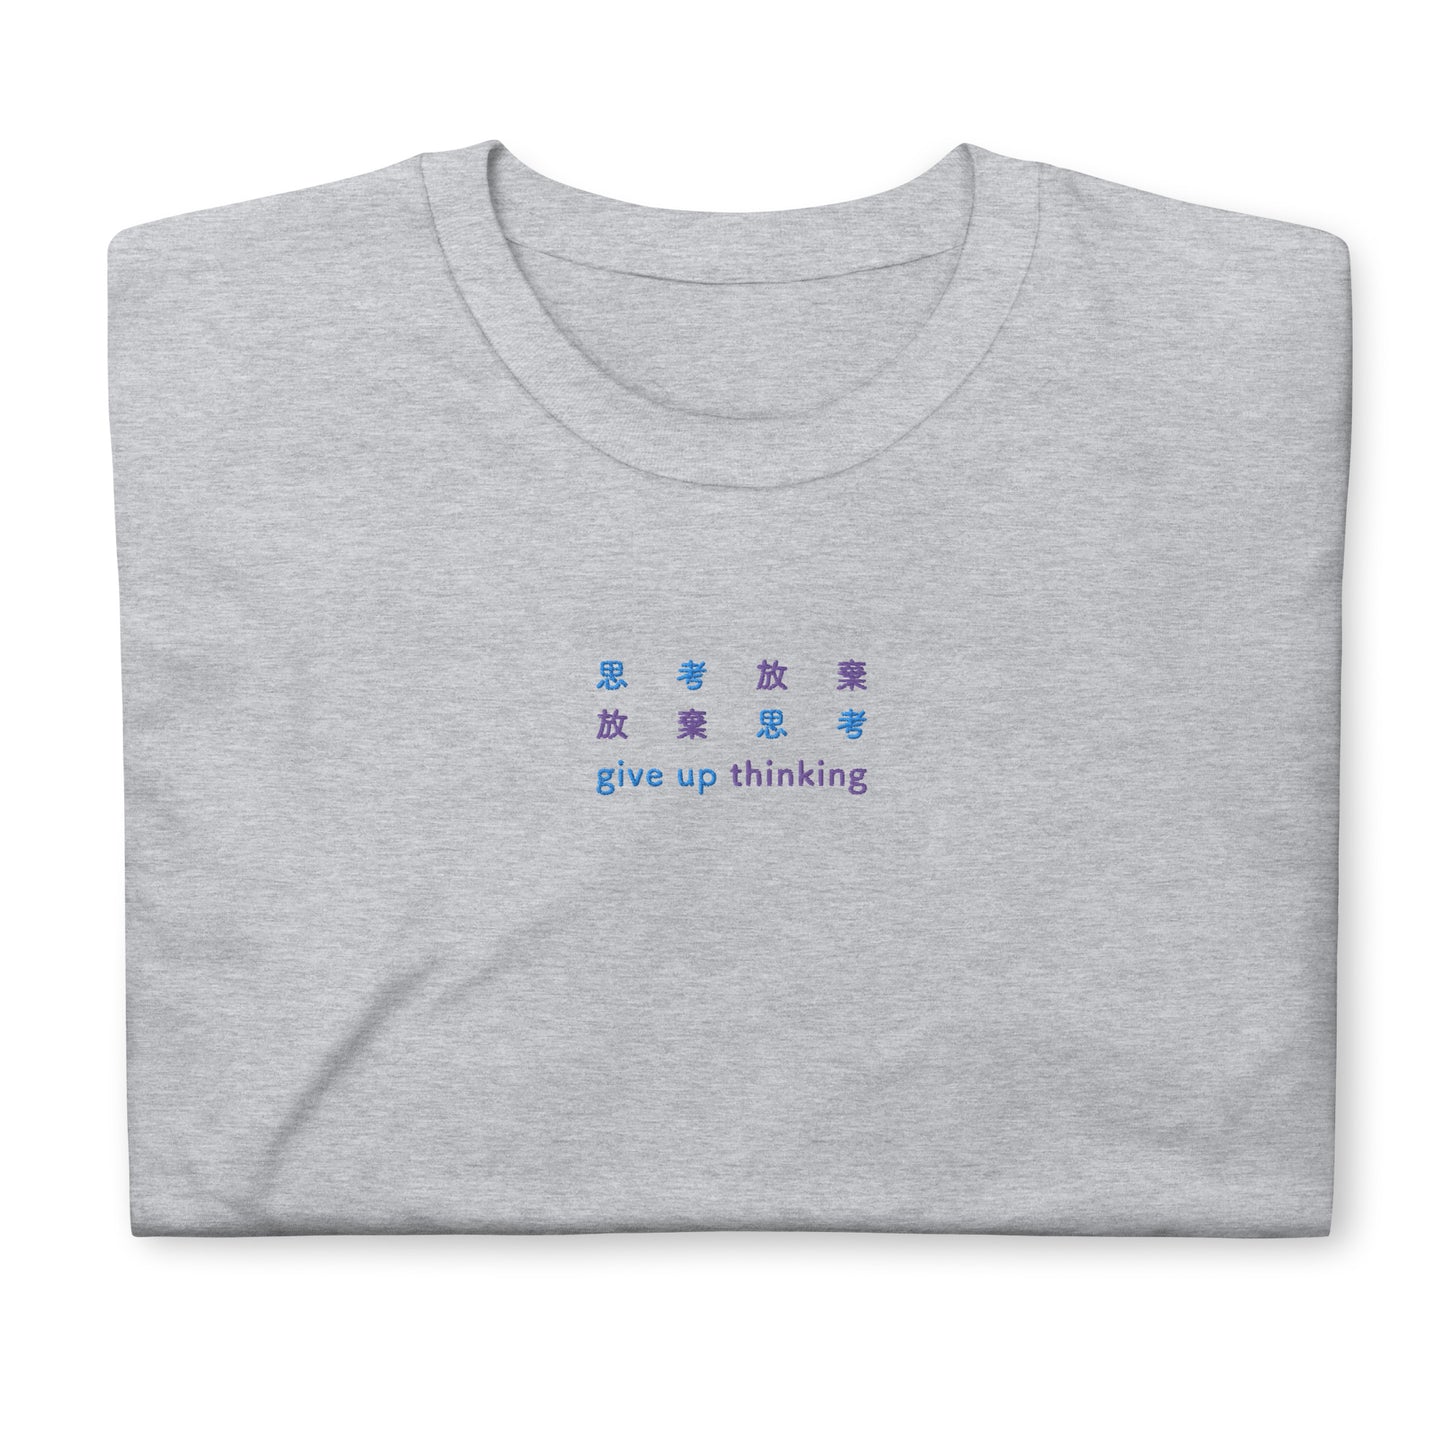 Light Gray High Quality Tee - Front Design with an Light Blue, Purple Embroidery "Give Up Thinking" in Japanese,Chinese and English